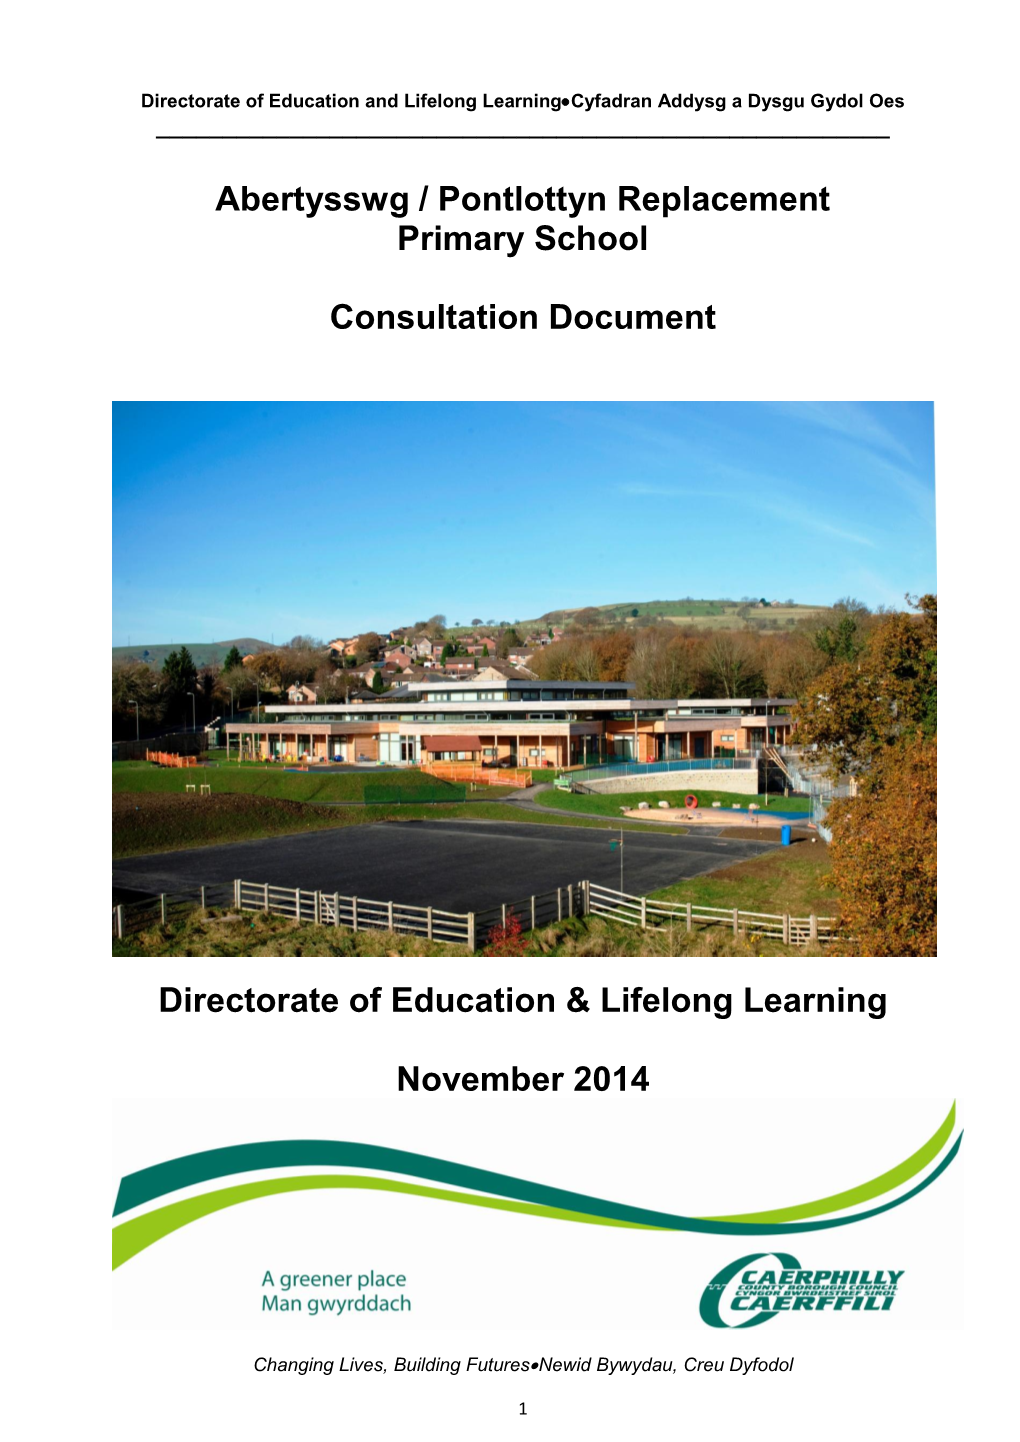 Abertysswg / Pontlottyn Replacement Primary School Consultation Document Directorate of Education & Lifelong Learning Novemb